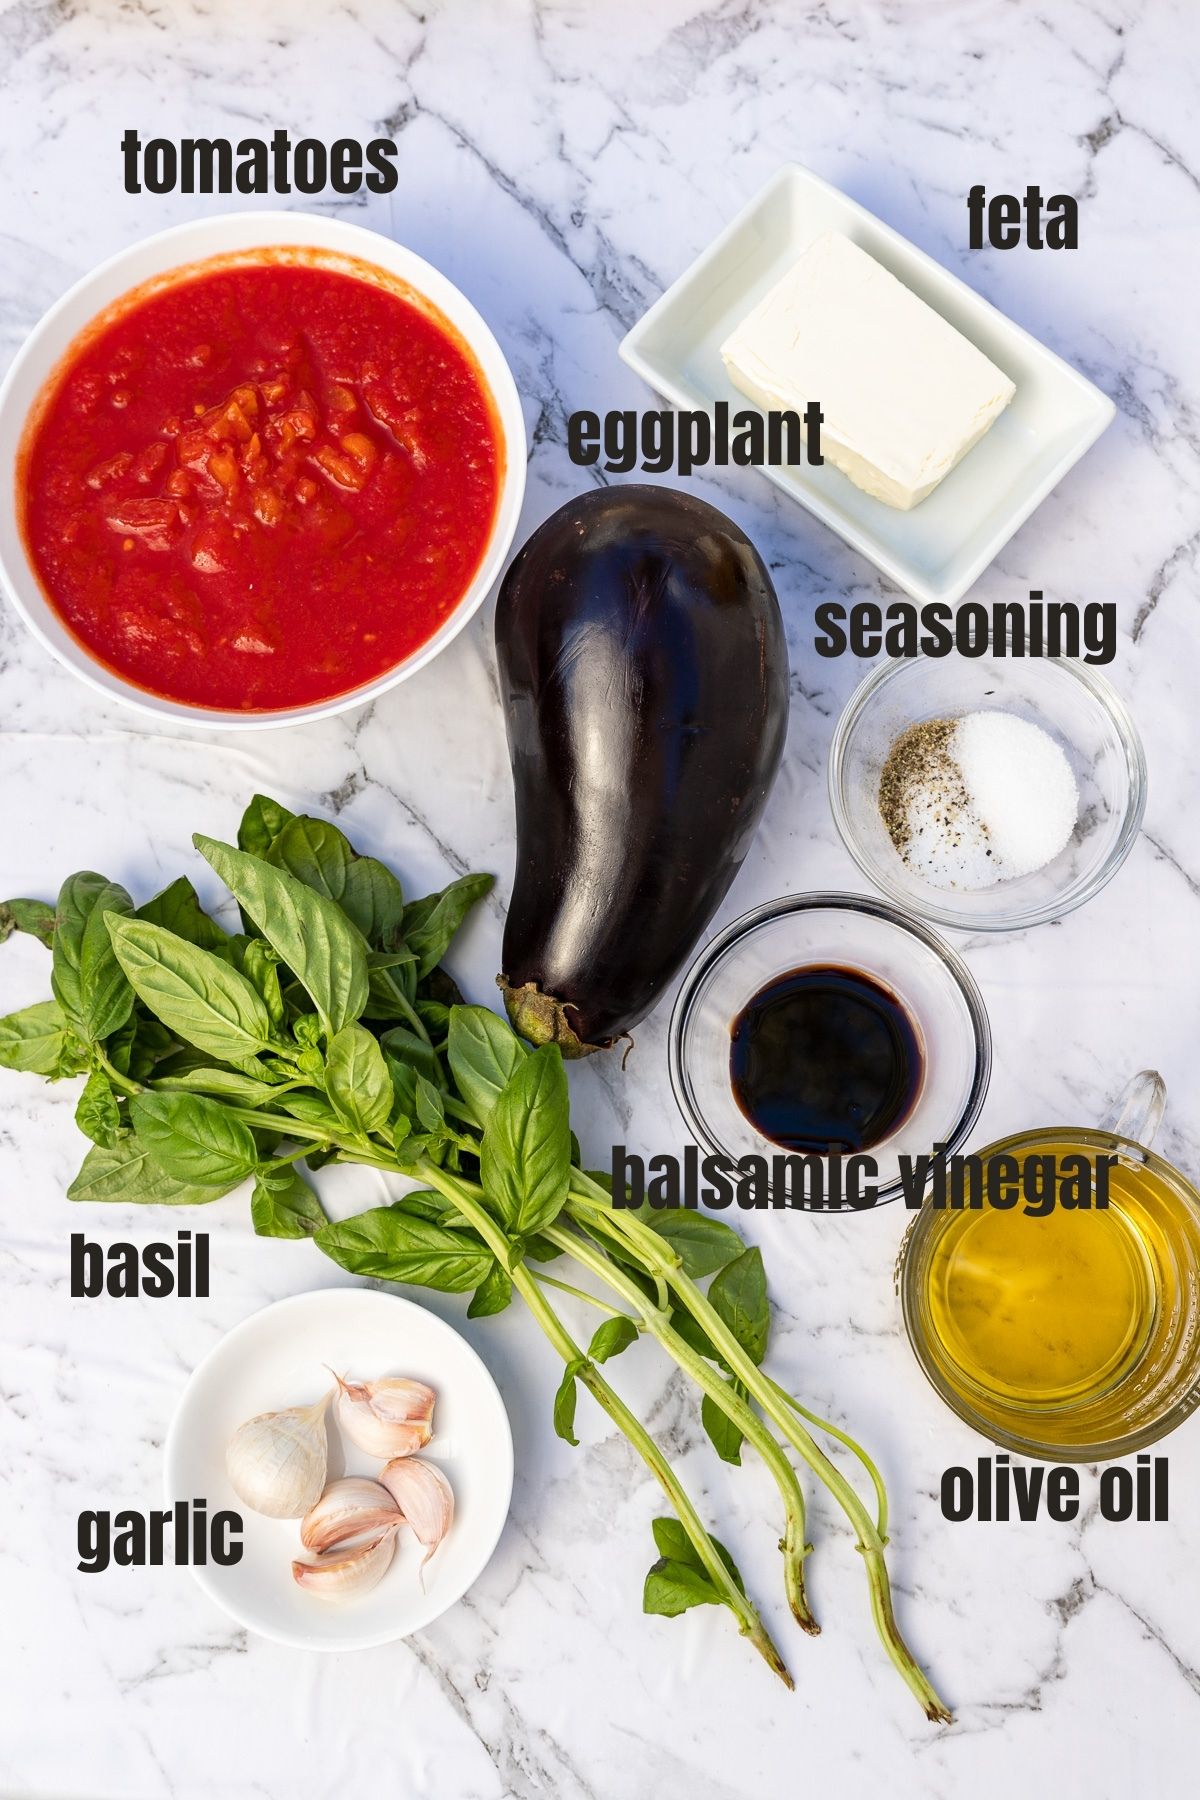 An overhead view of the ingredients for Greek baked eggplant, including eggplant, garlic cloves, olive oil, canned tomatoes, fresh basil, seasonings, feta and balsamic vinegar